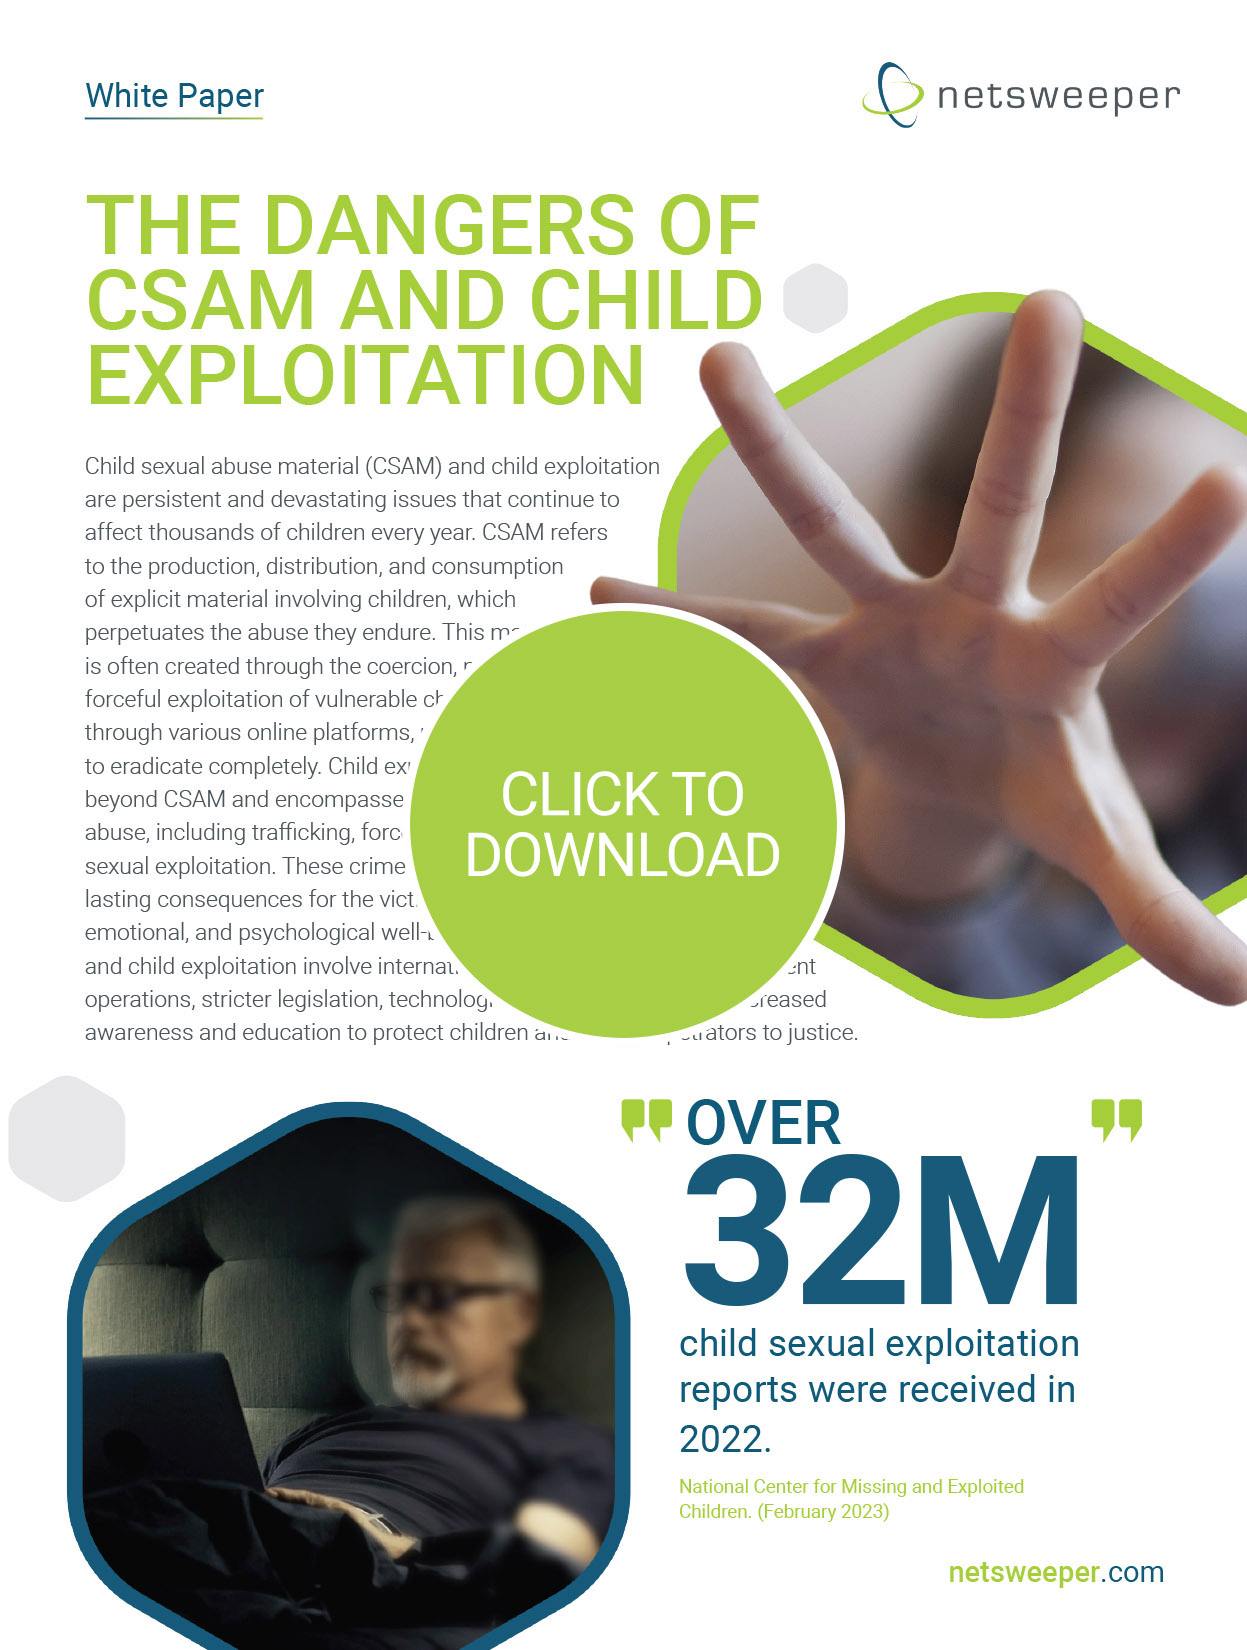 White Paper: The Dangers of CSAM and Child Exploitation